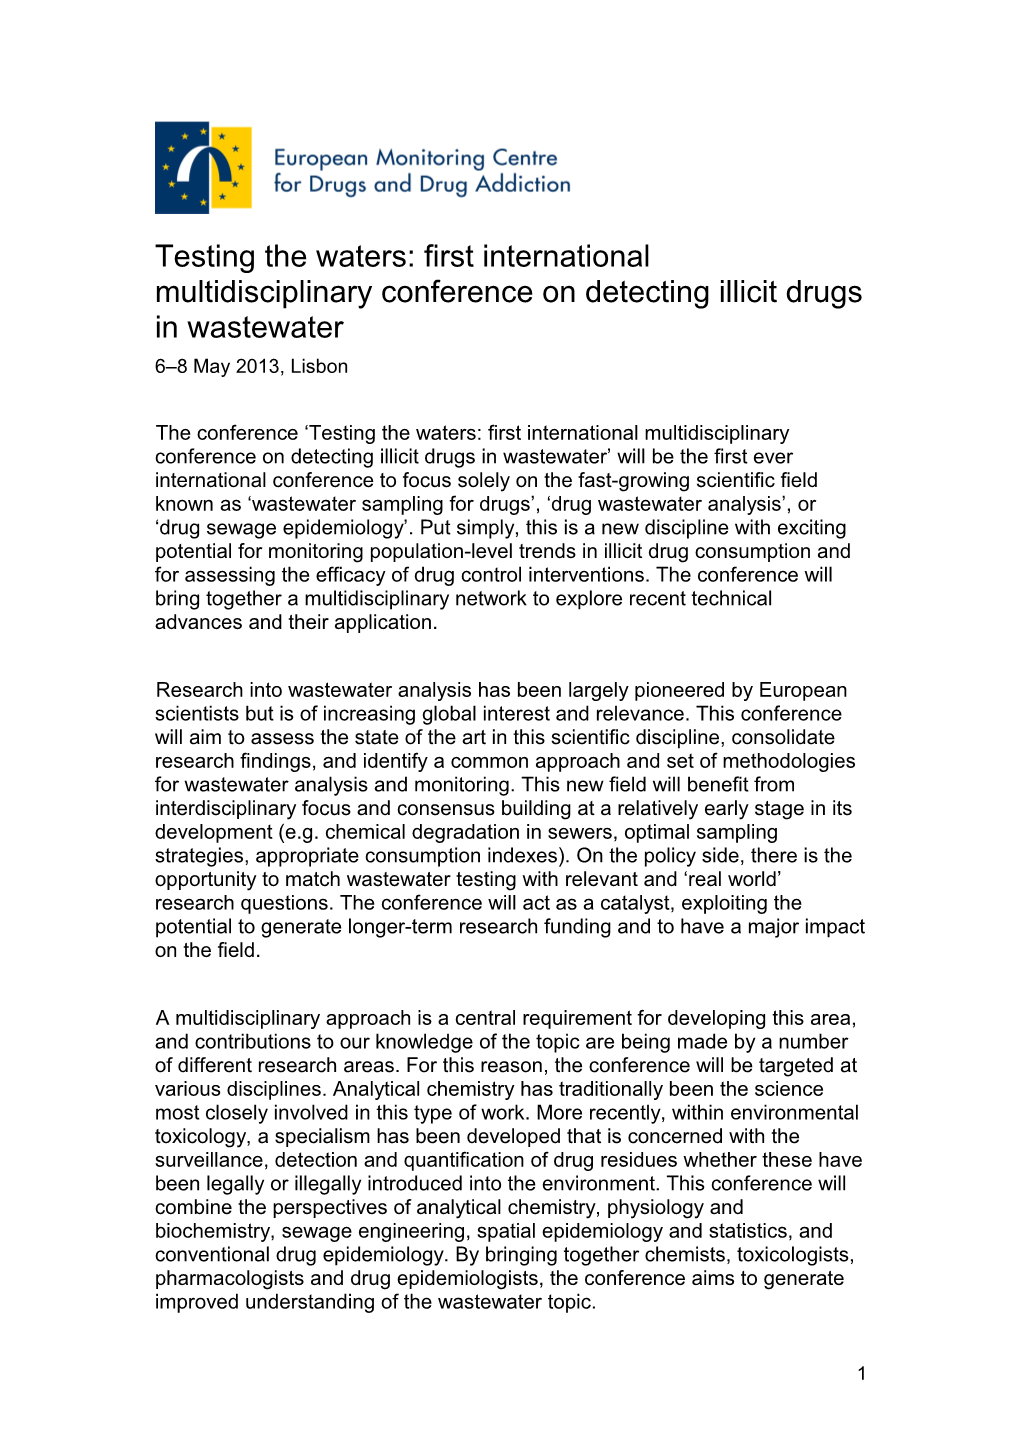 Testing the Waters: First International Multidisciplinary Conference on Detecting Illicit